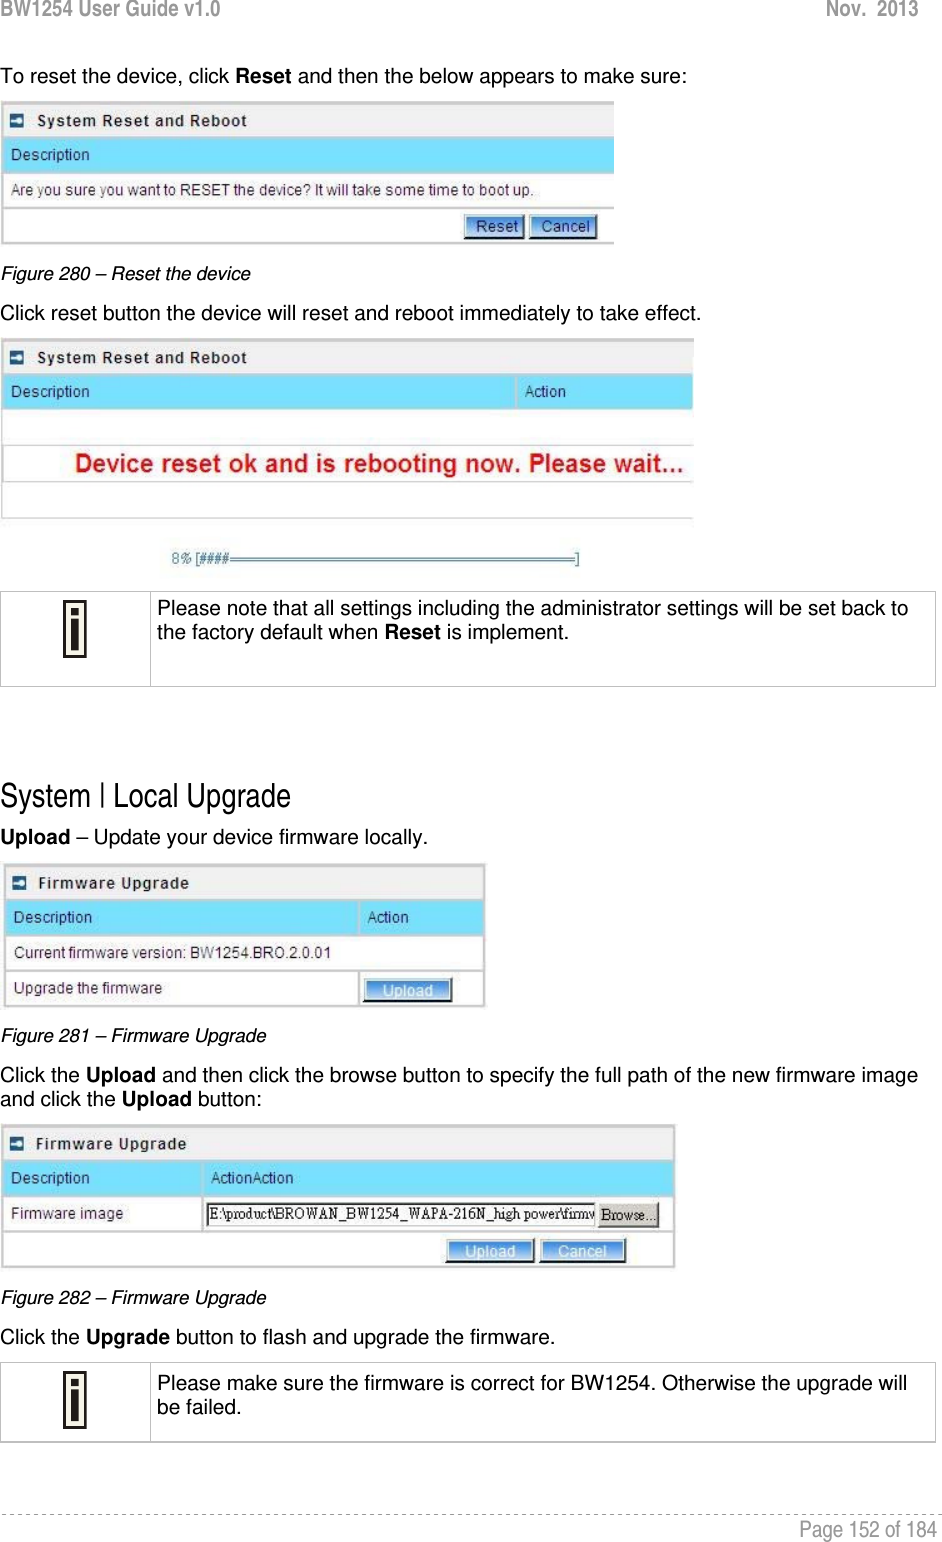 BW1254 User Guide v1.0  Nov.  2013     Page 152 of 184   To reset the device, click Reset and then the below appears to make sure:  Figure 280 – Reset the device Click reset button the device will reset and reboot immediately to take effect.   Please note that all settings including the administrator settings will be set back to the factory default when Reset is implement.   System | Local Upgrade Upload – Update your device firmware locally.  Figure 281 – Firmware Upgrade Click the Upload and then click the browse button to specify the full path of the new firmware image and click the Upload button:  Figure 282 – Firmware Upgrade Click the Upgrade button to flash and upgrade the firmware.  Please make sure the firmware is correct for BW1254. Otherwise the upgrade will be failed.  